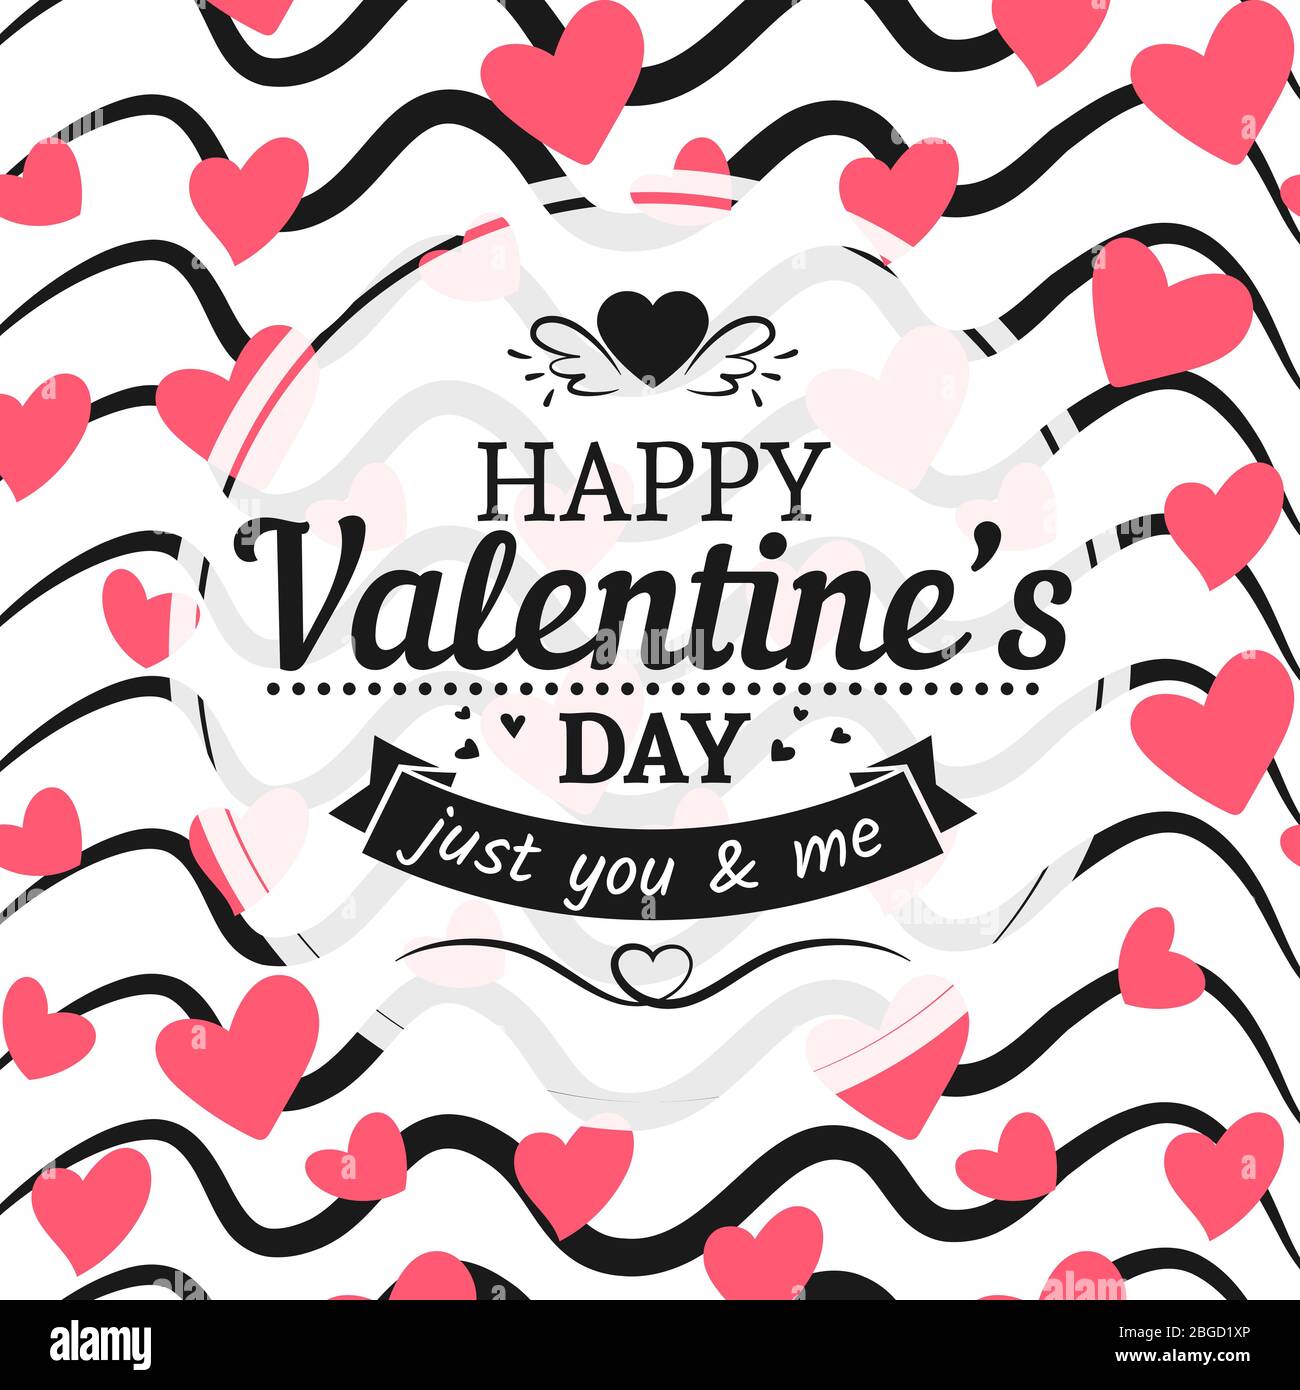 Vintage valentines day card template with typography sign hearts and hand drawn scribble background. Vector illustration Stock Vector